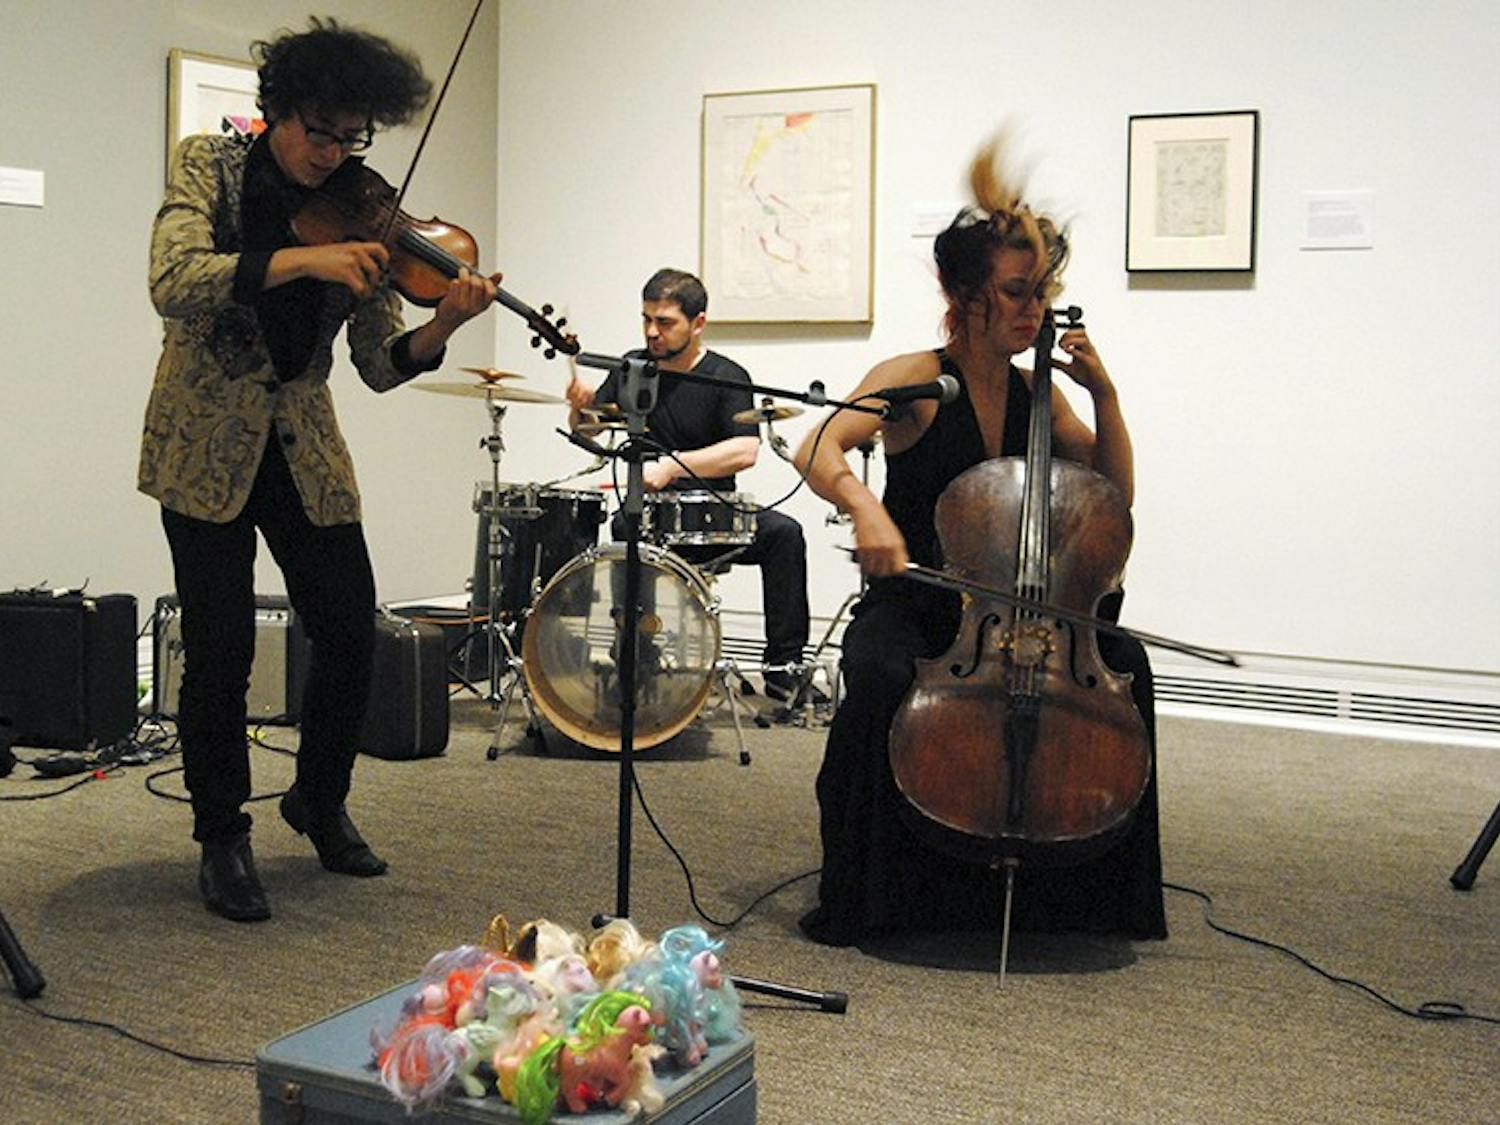 Valerie Keuhne & the Wasps Nests performed in the Ackland Art Museum Sunday afternoon as a part of the Experimental Music Study Group concert.